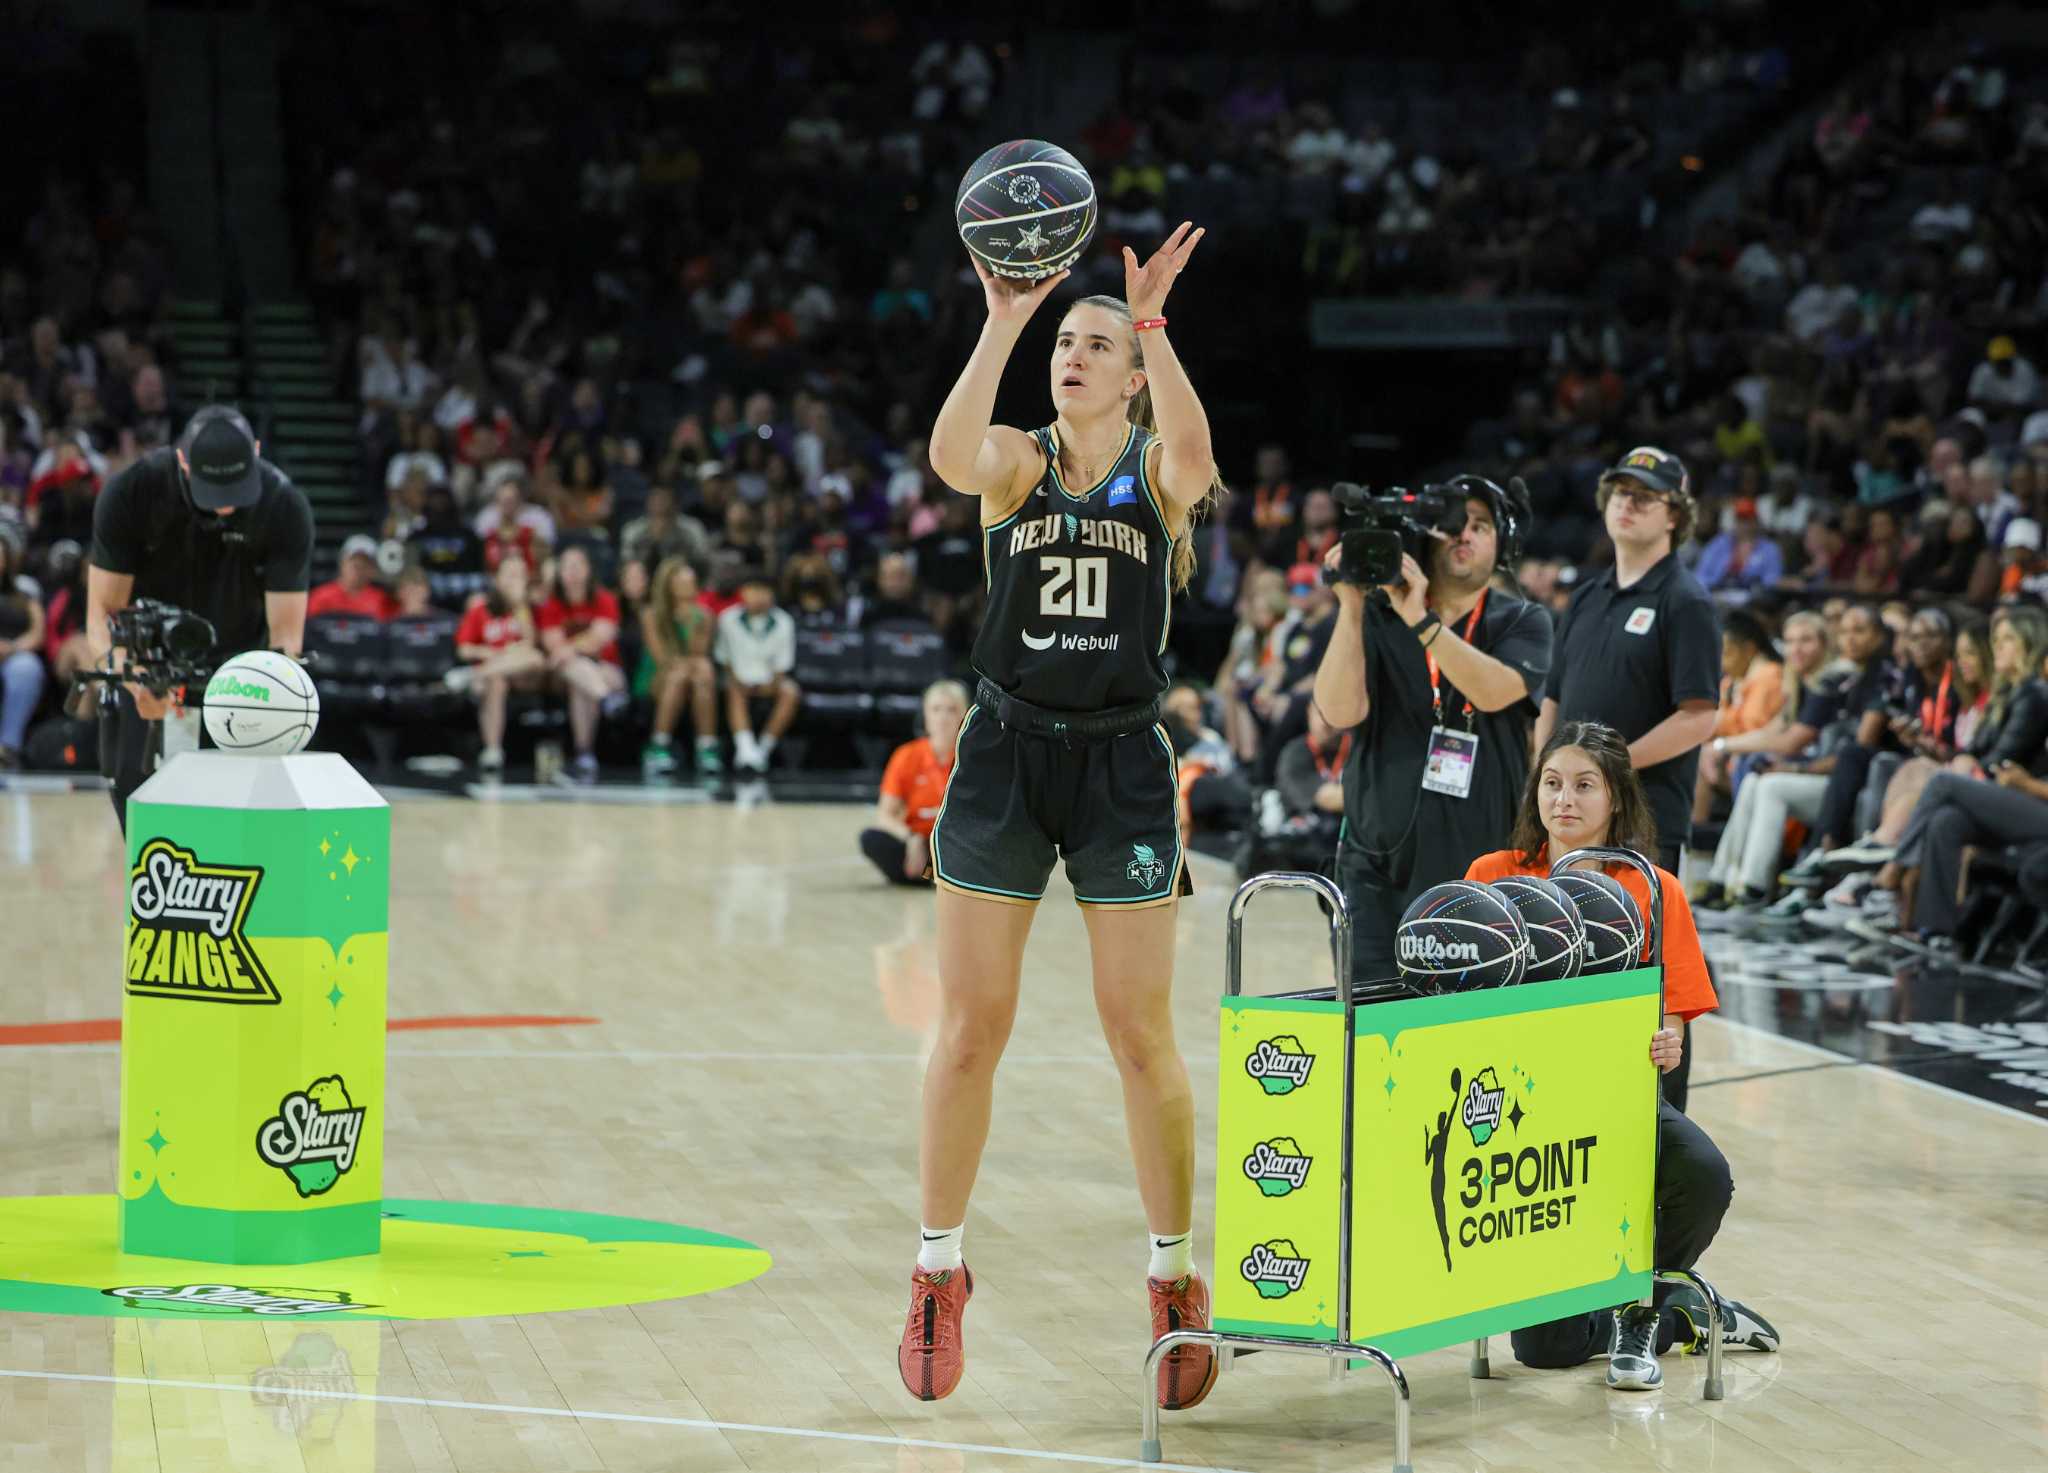 Liberty's Sabrina Ionescu breaks pro basketball 3point contest record